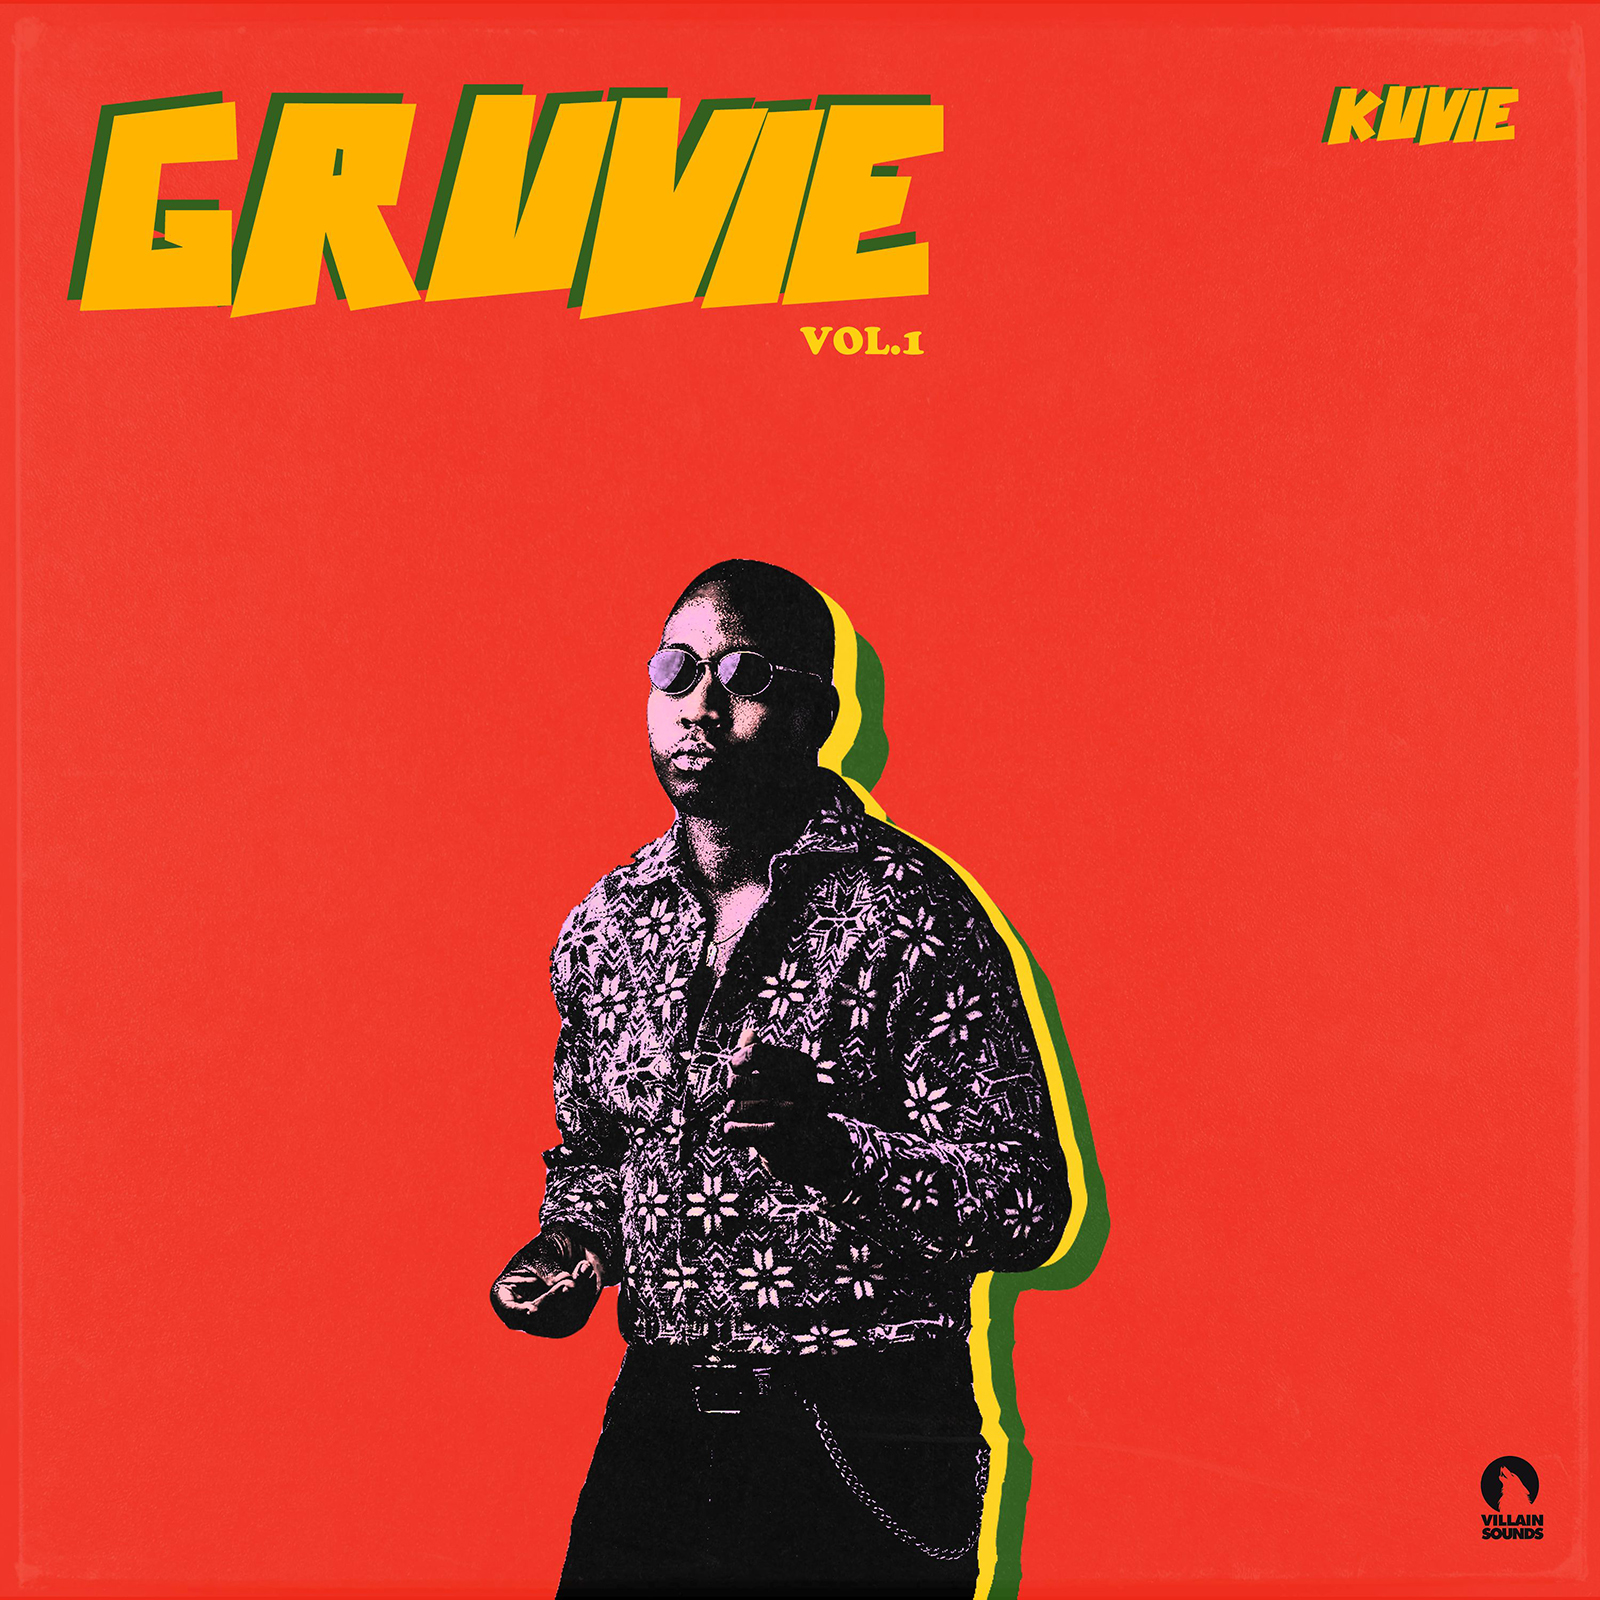 EP Review: Gruvie Vol.1 by Kuvie